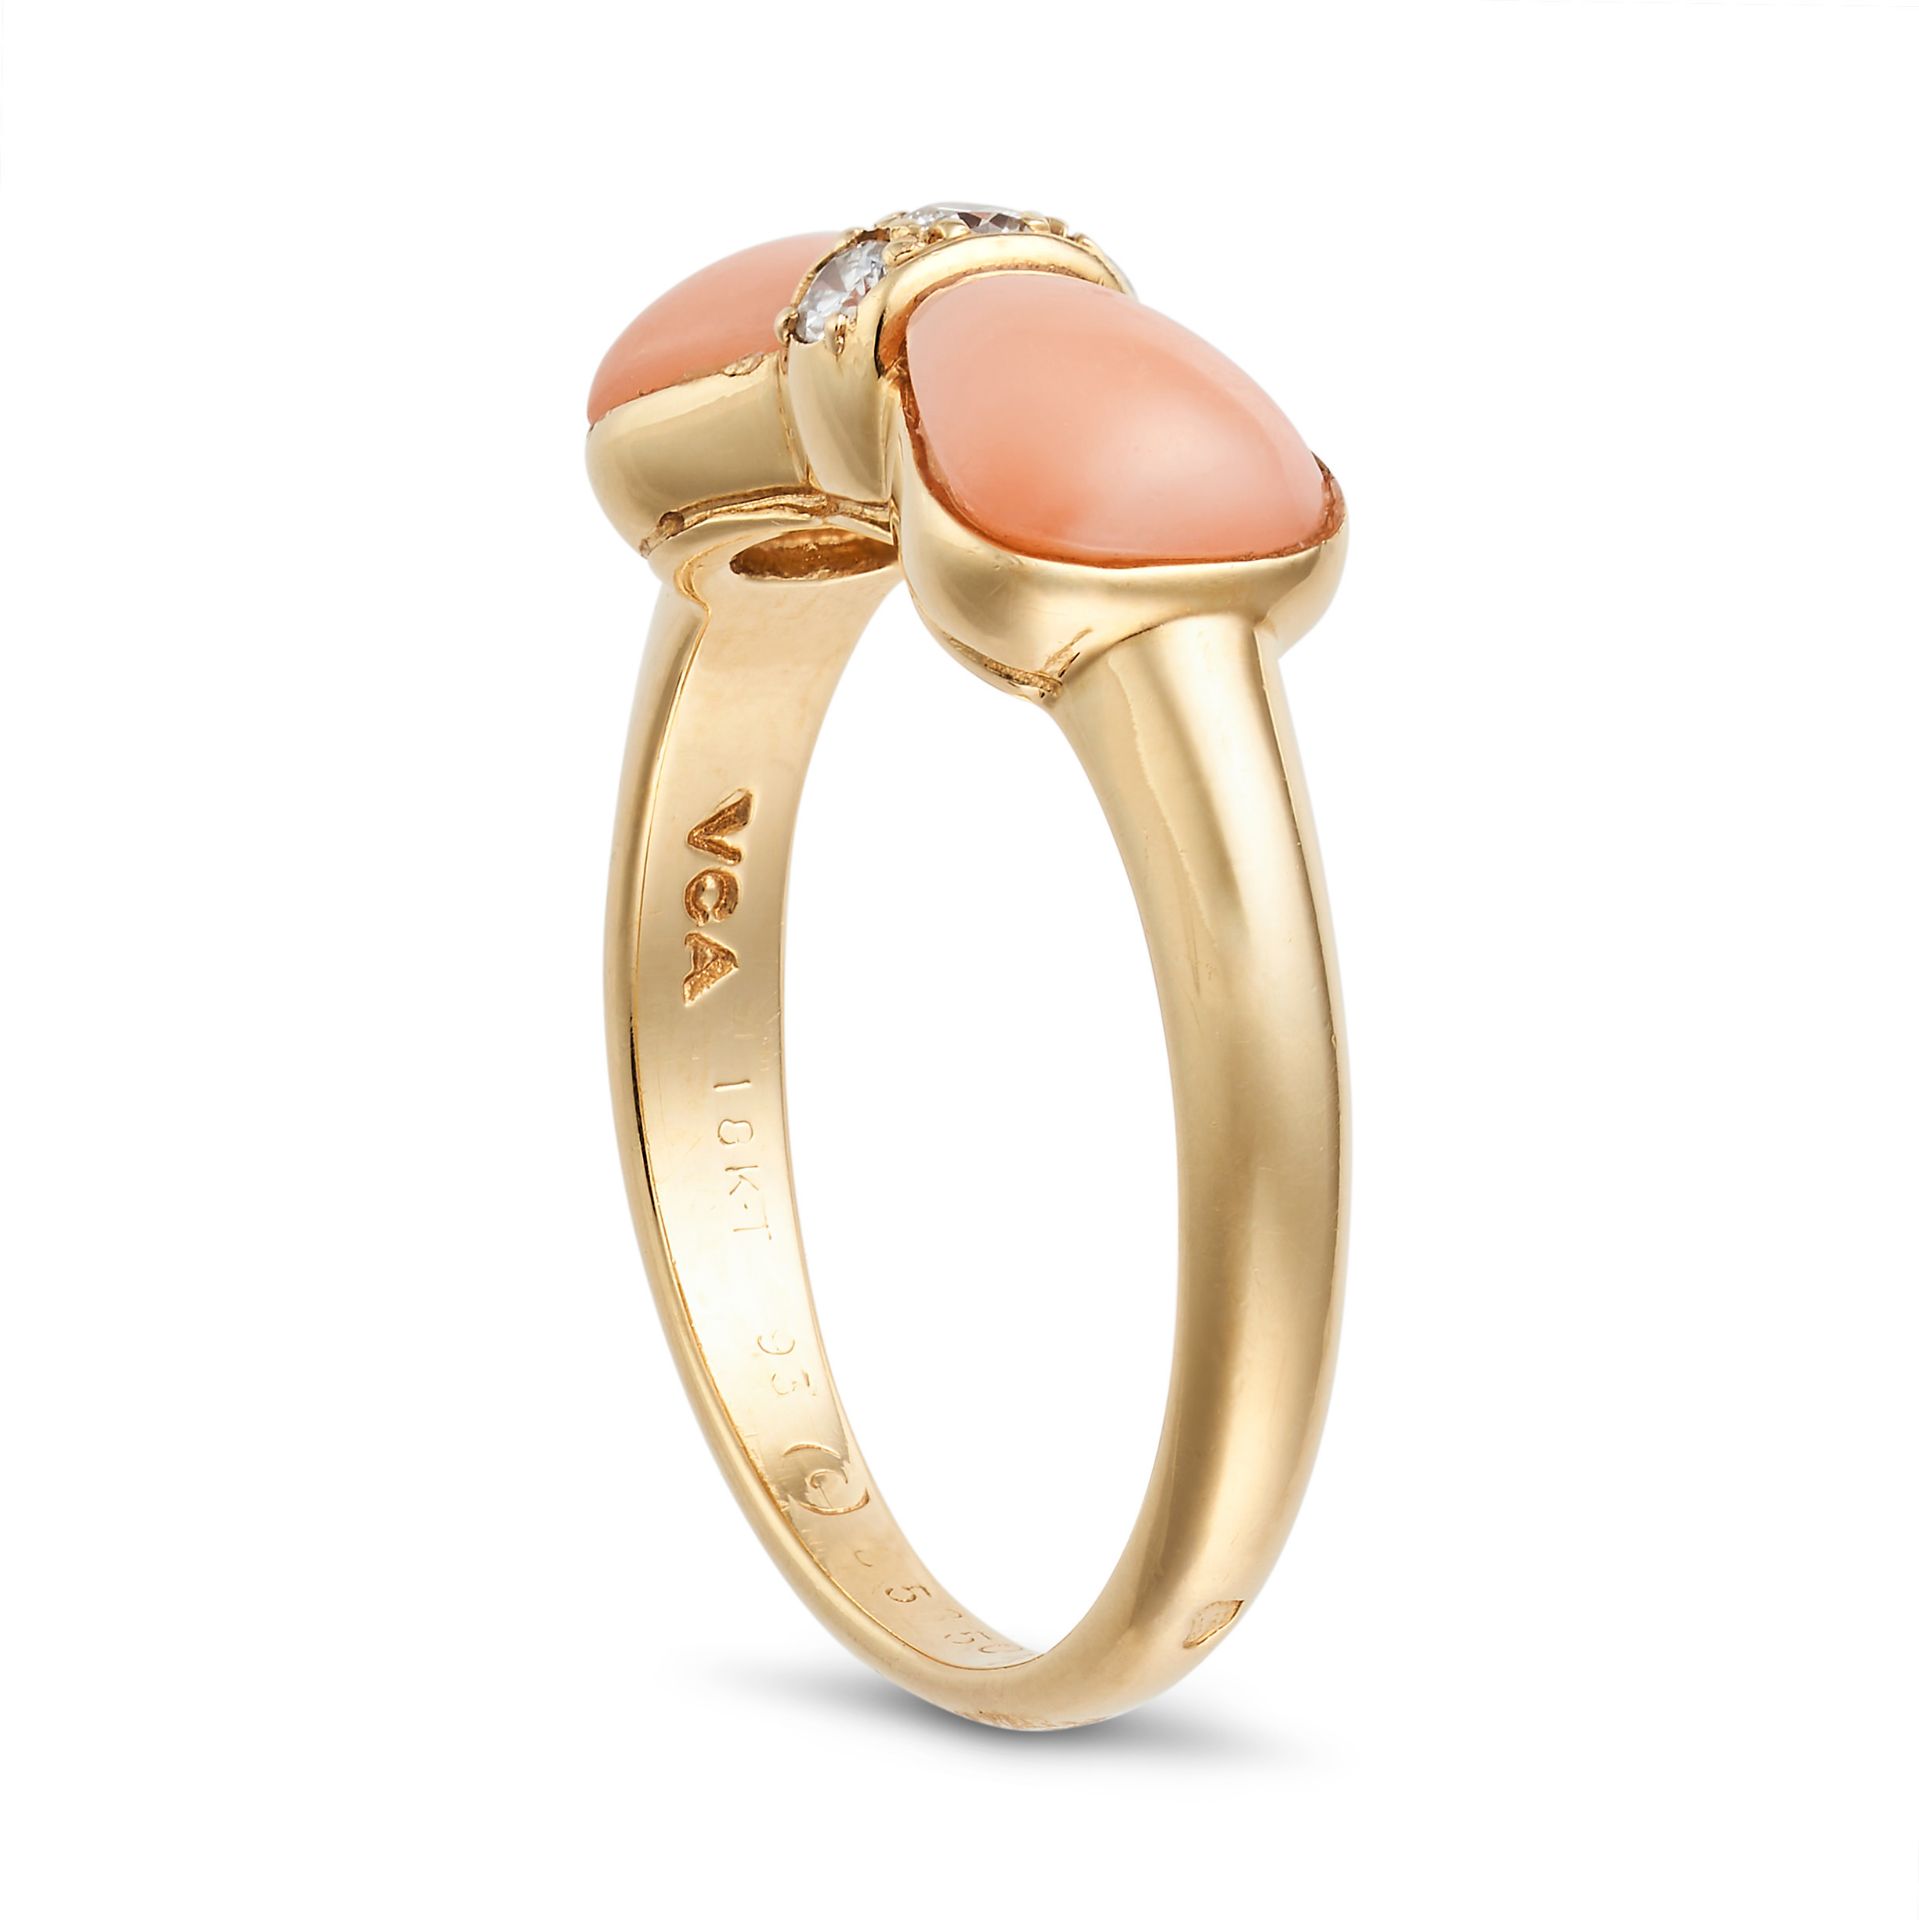 VAN CLEEF & ARPELS, A CORAL AND DIAMOND BOW RING in 18ct yellow gold, designed as a bow set with ... - Image 2 of 2